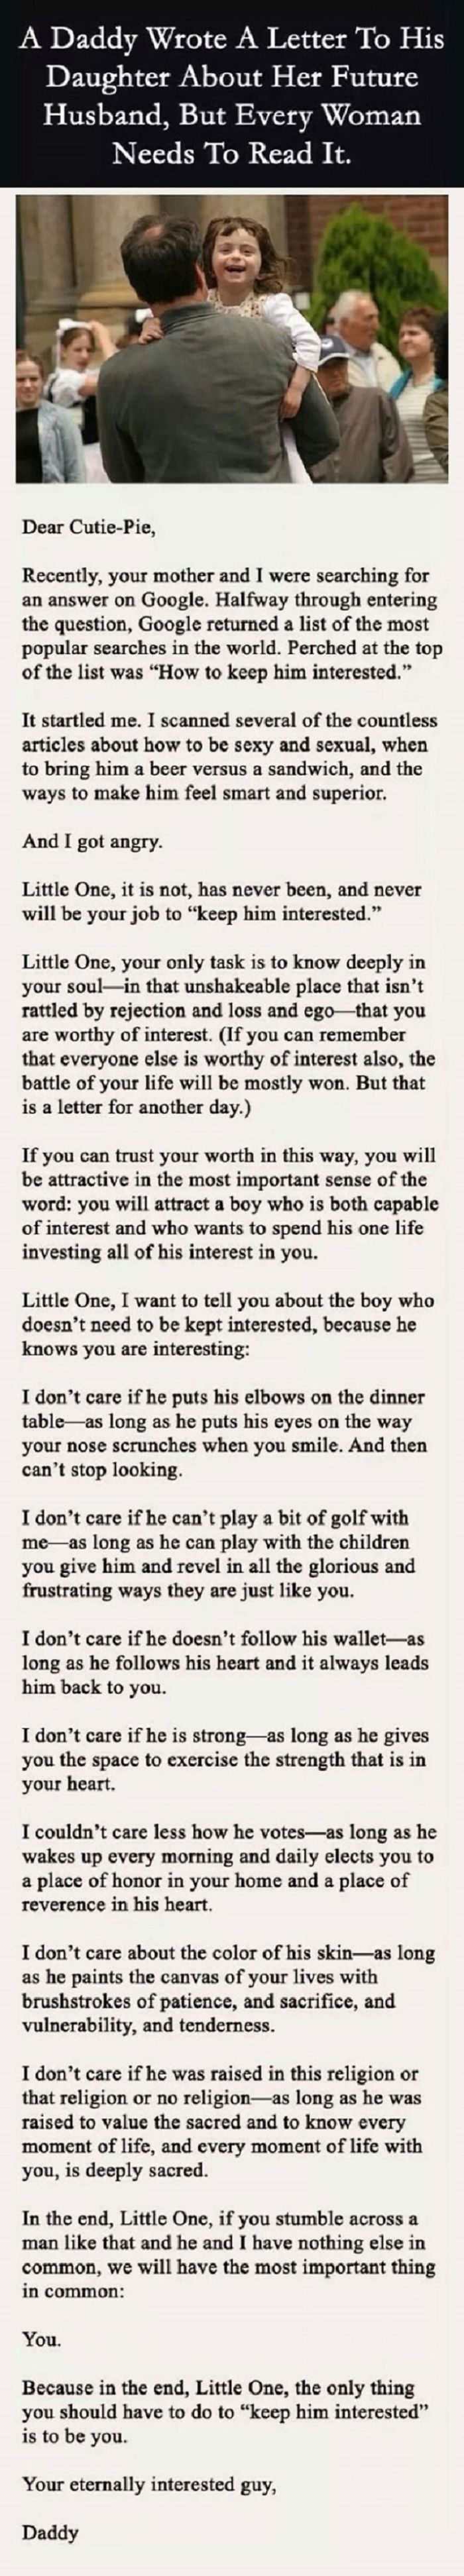 Letter From A Dad To His Daughter